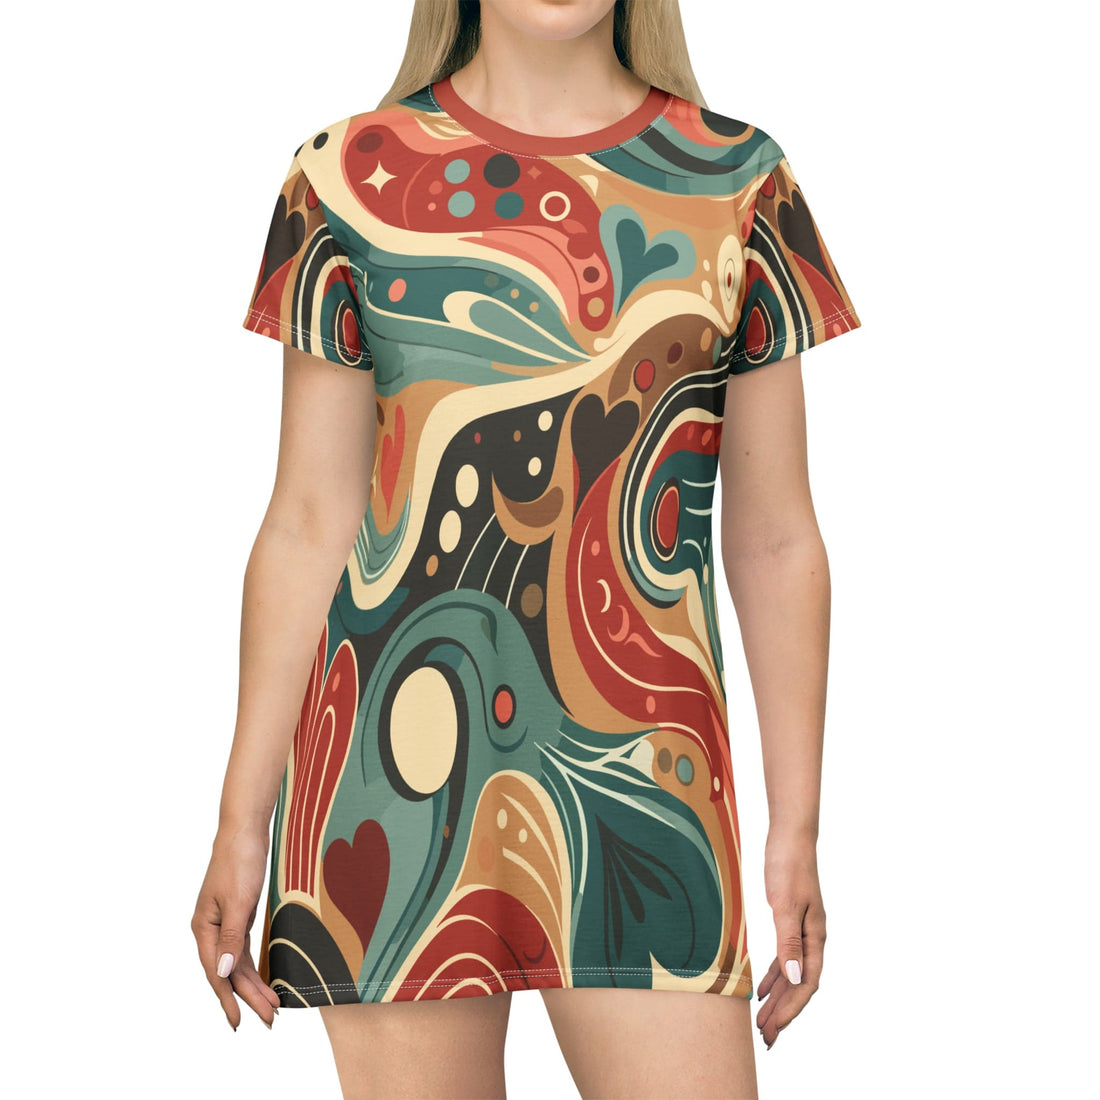 Printify Mid Mod Retro Swirl T-Shirt Dress, Groovy Hippie Psychedelic Hipster Style Party Dress All Over Prints XS 20885766076154020690